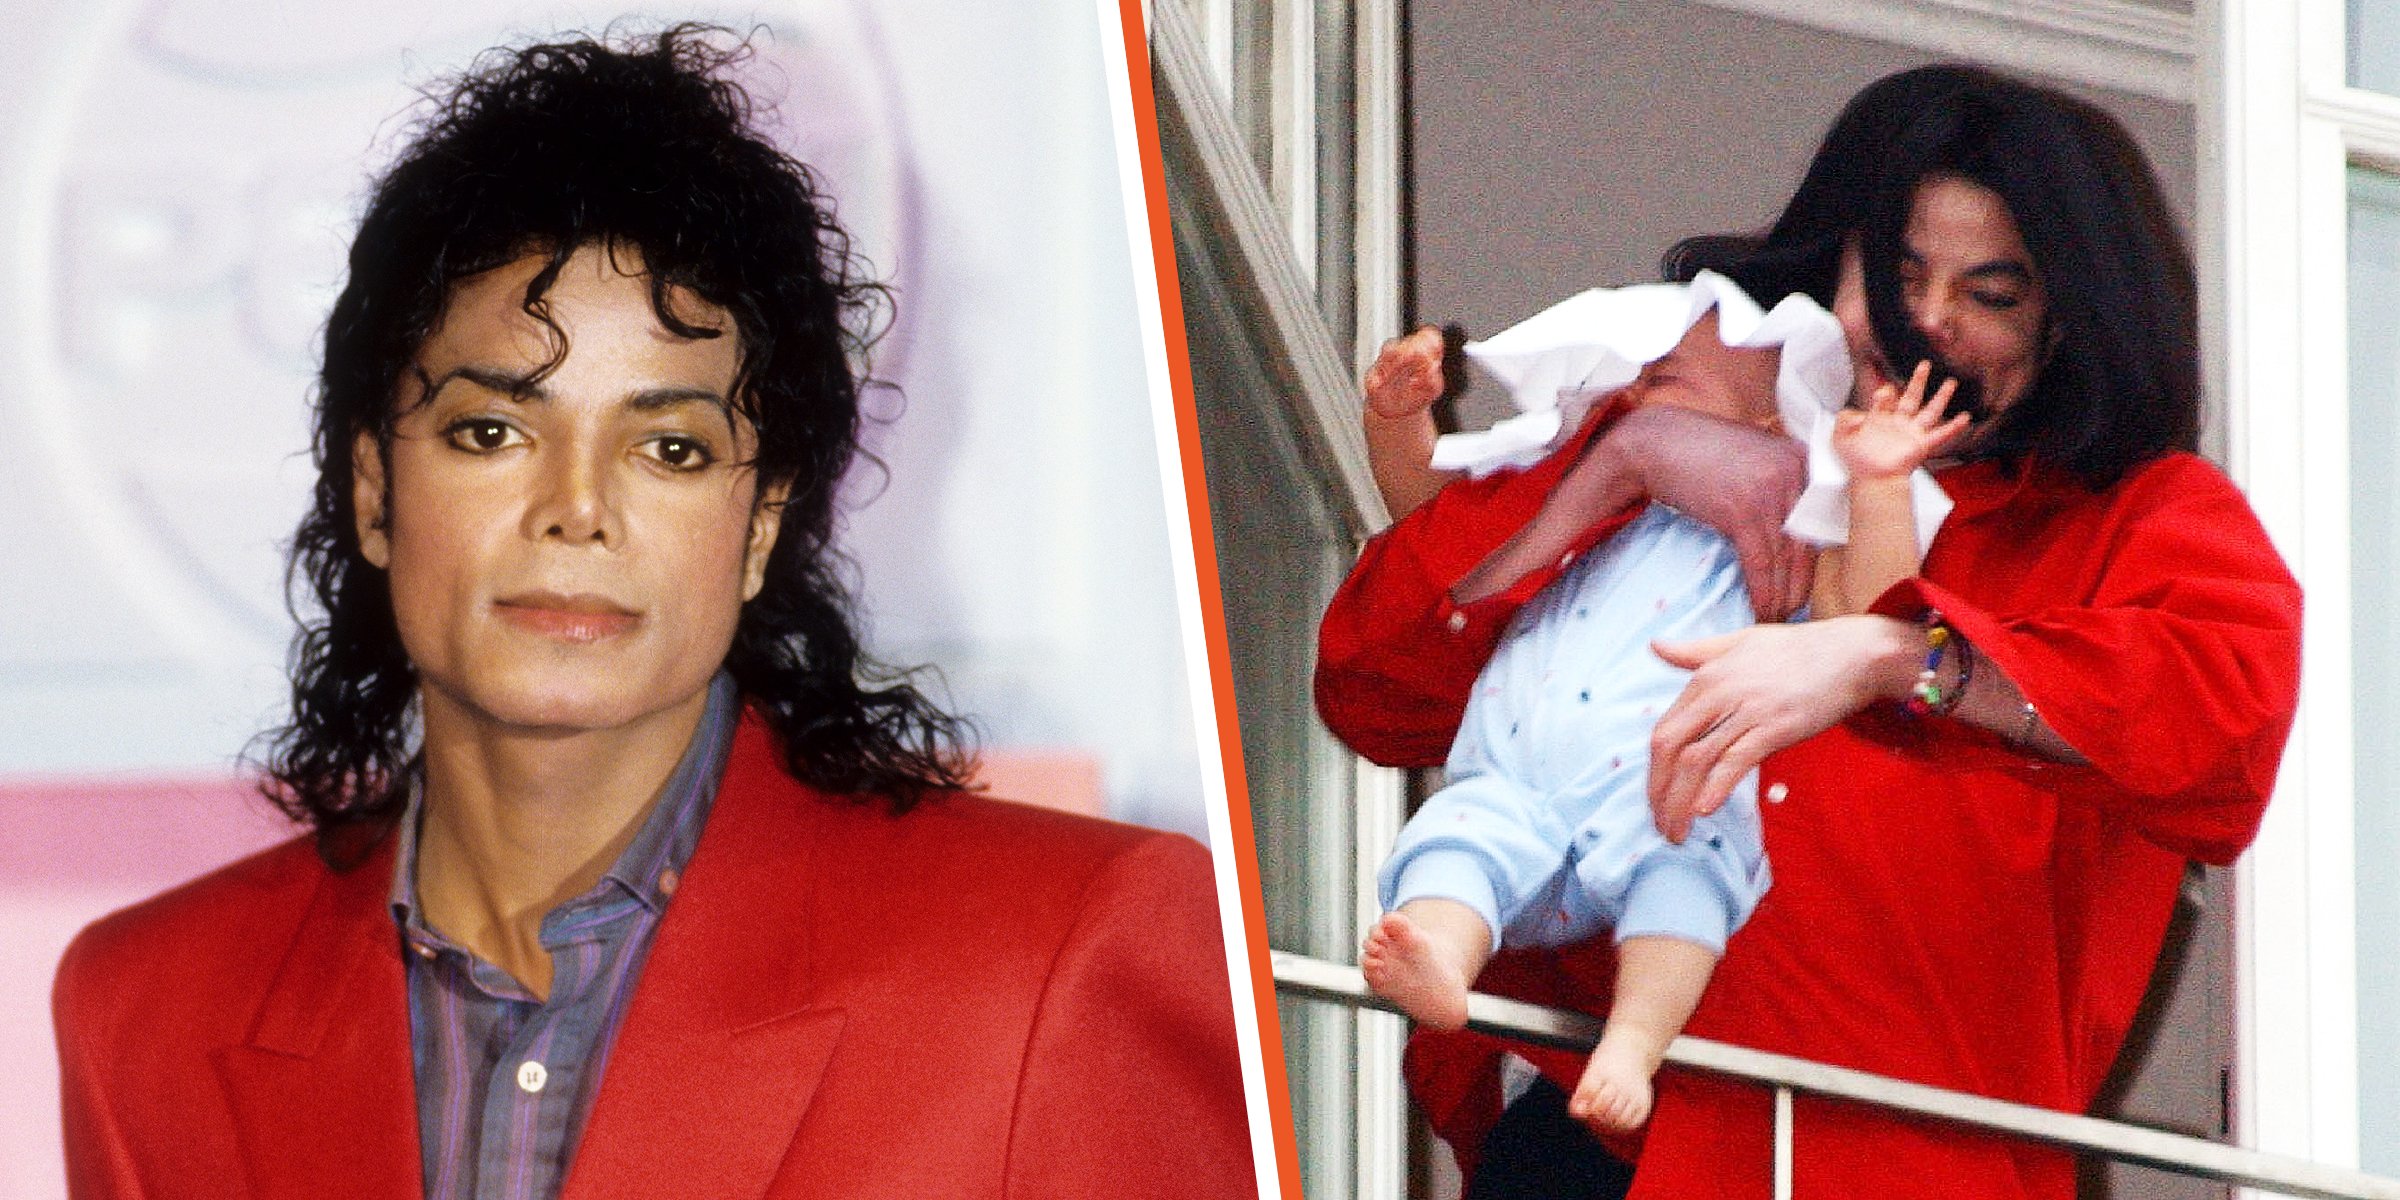 Michael Jackson | Blanket and Michael Jackson | Source: Getty Images